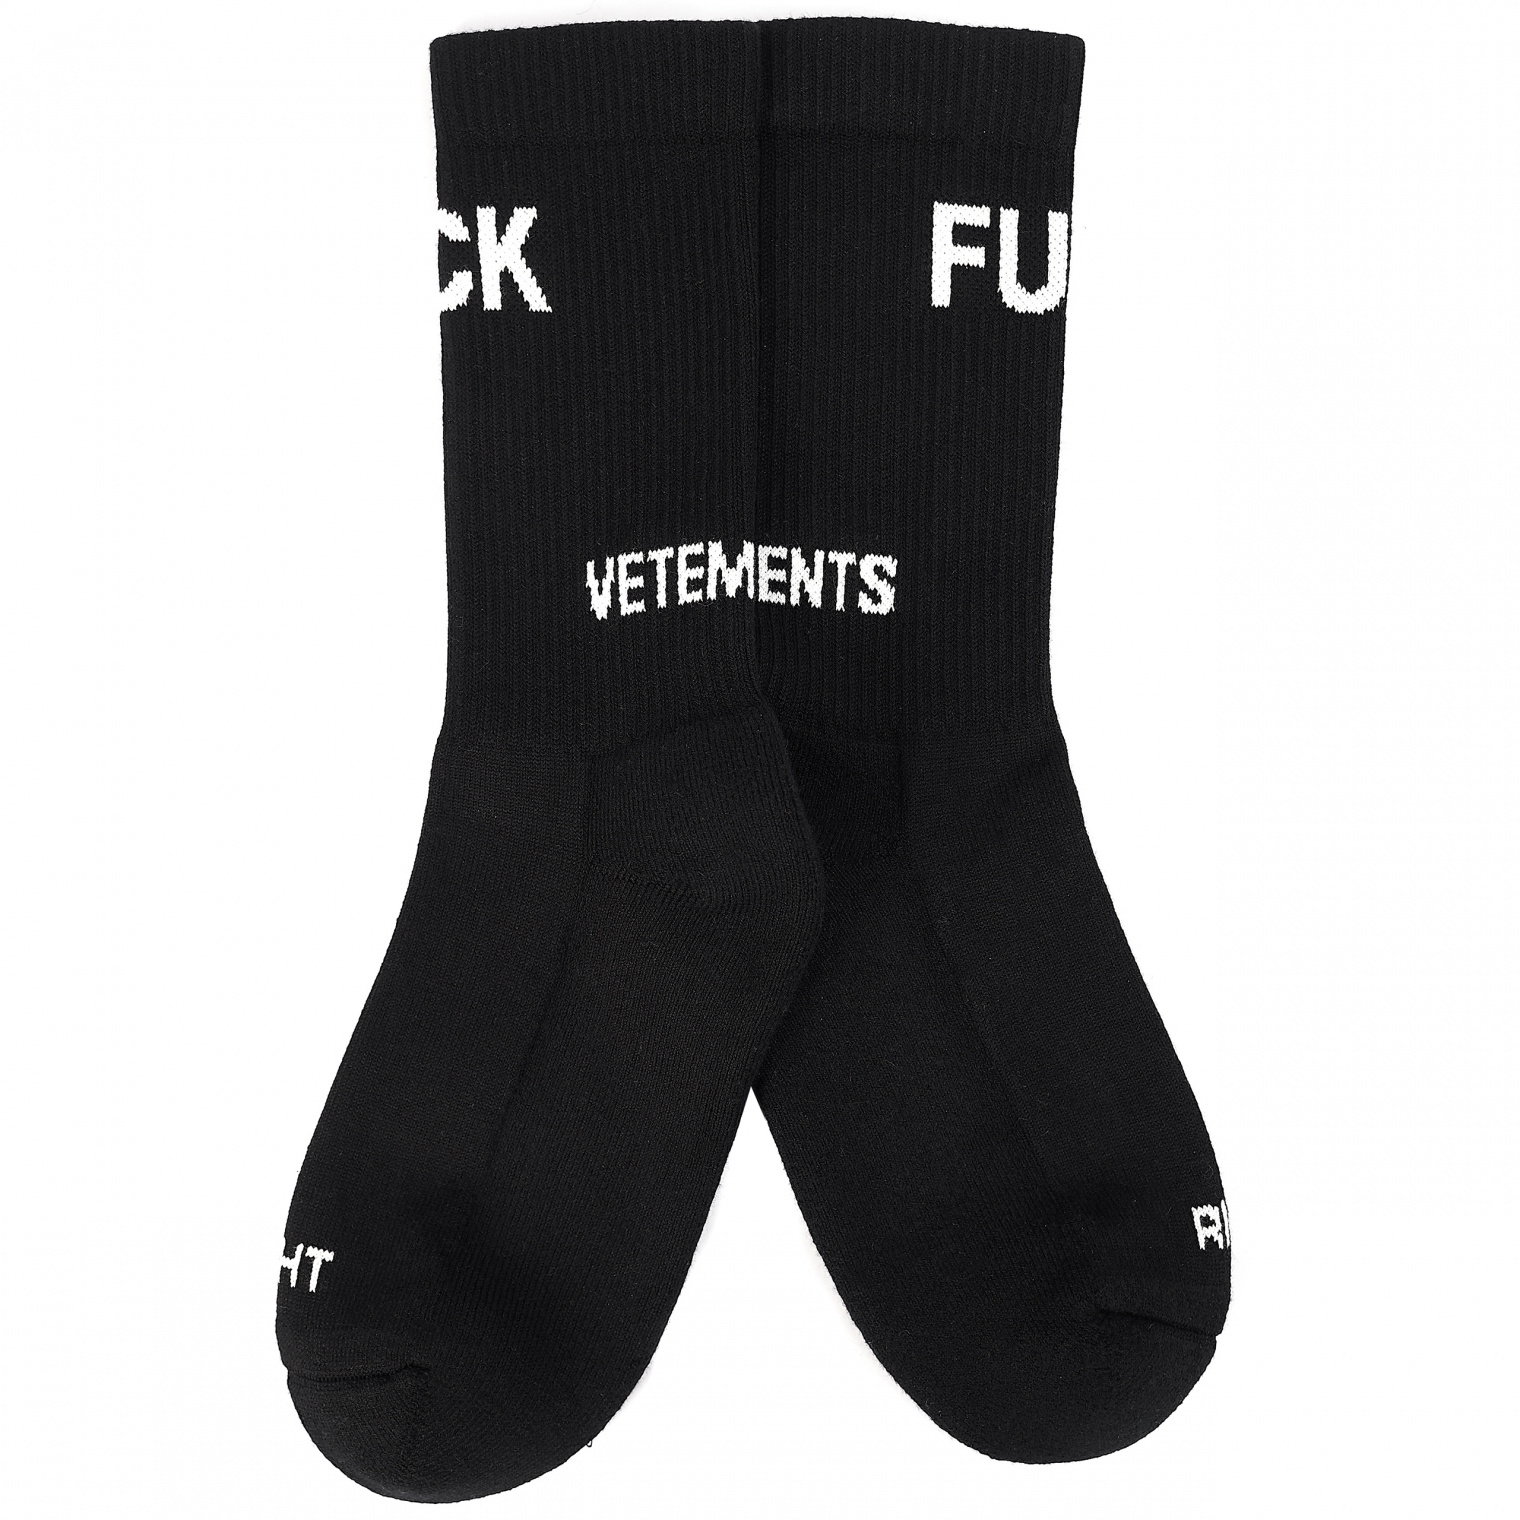 VETEMENTS Socks with embroidered lettering Fuck